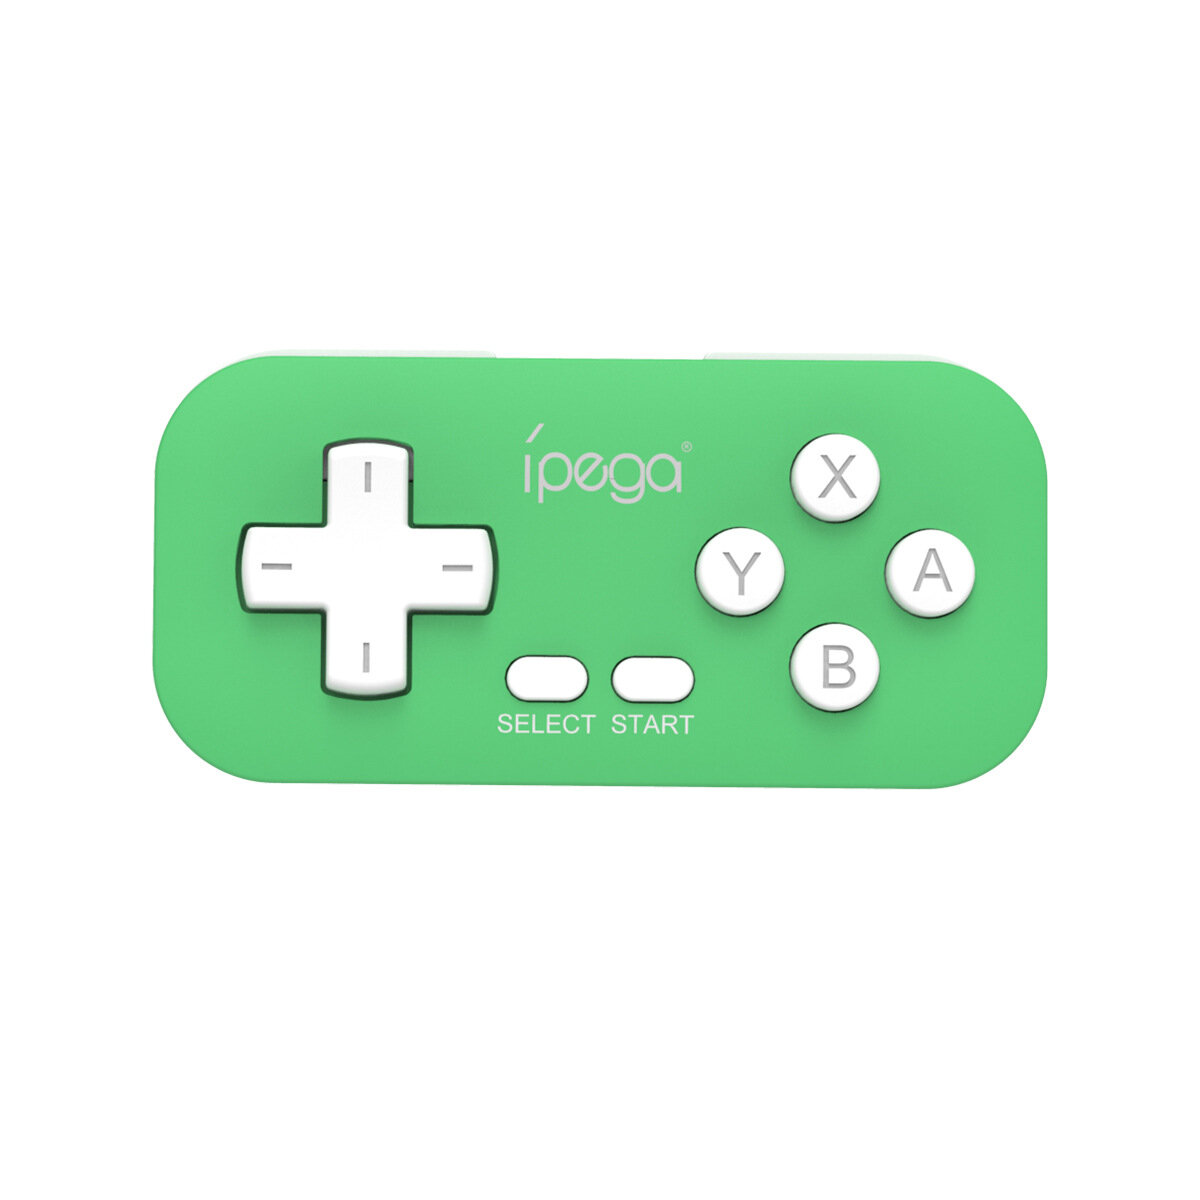 

IPEGA PG-9193 Game Controller for Nintendo Switch PS3 Android PC Dual Motor Vibration Gamepad